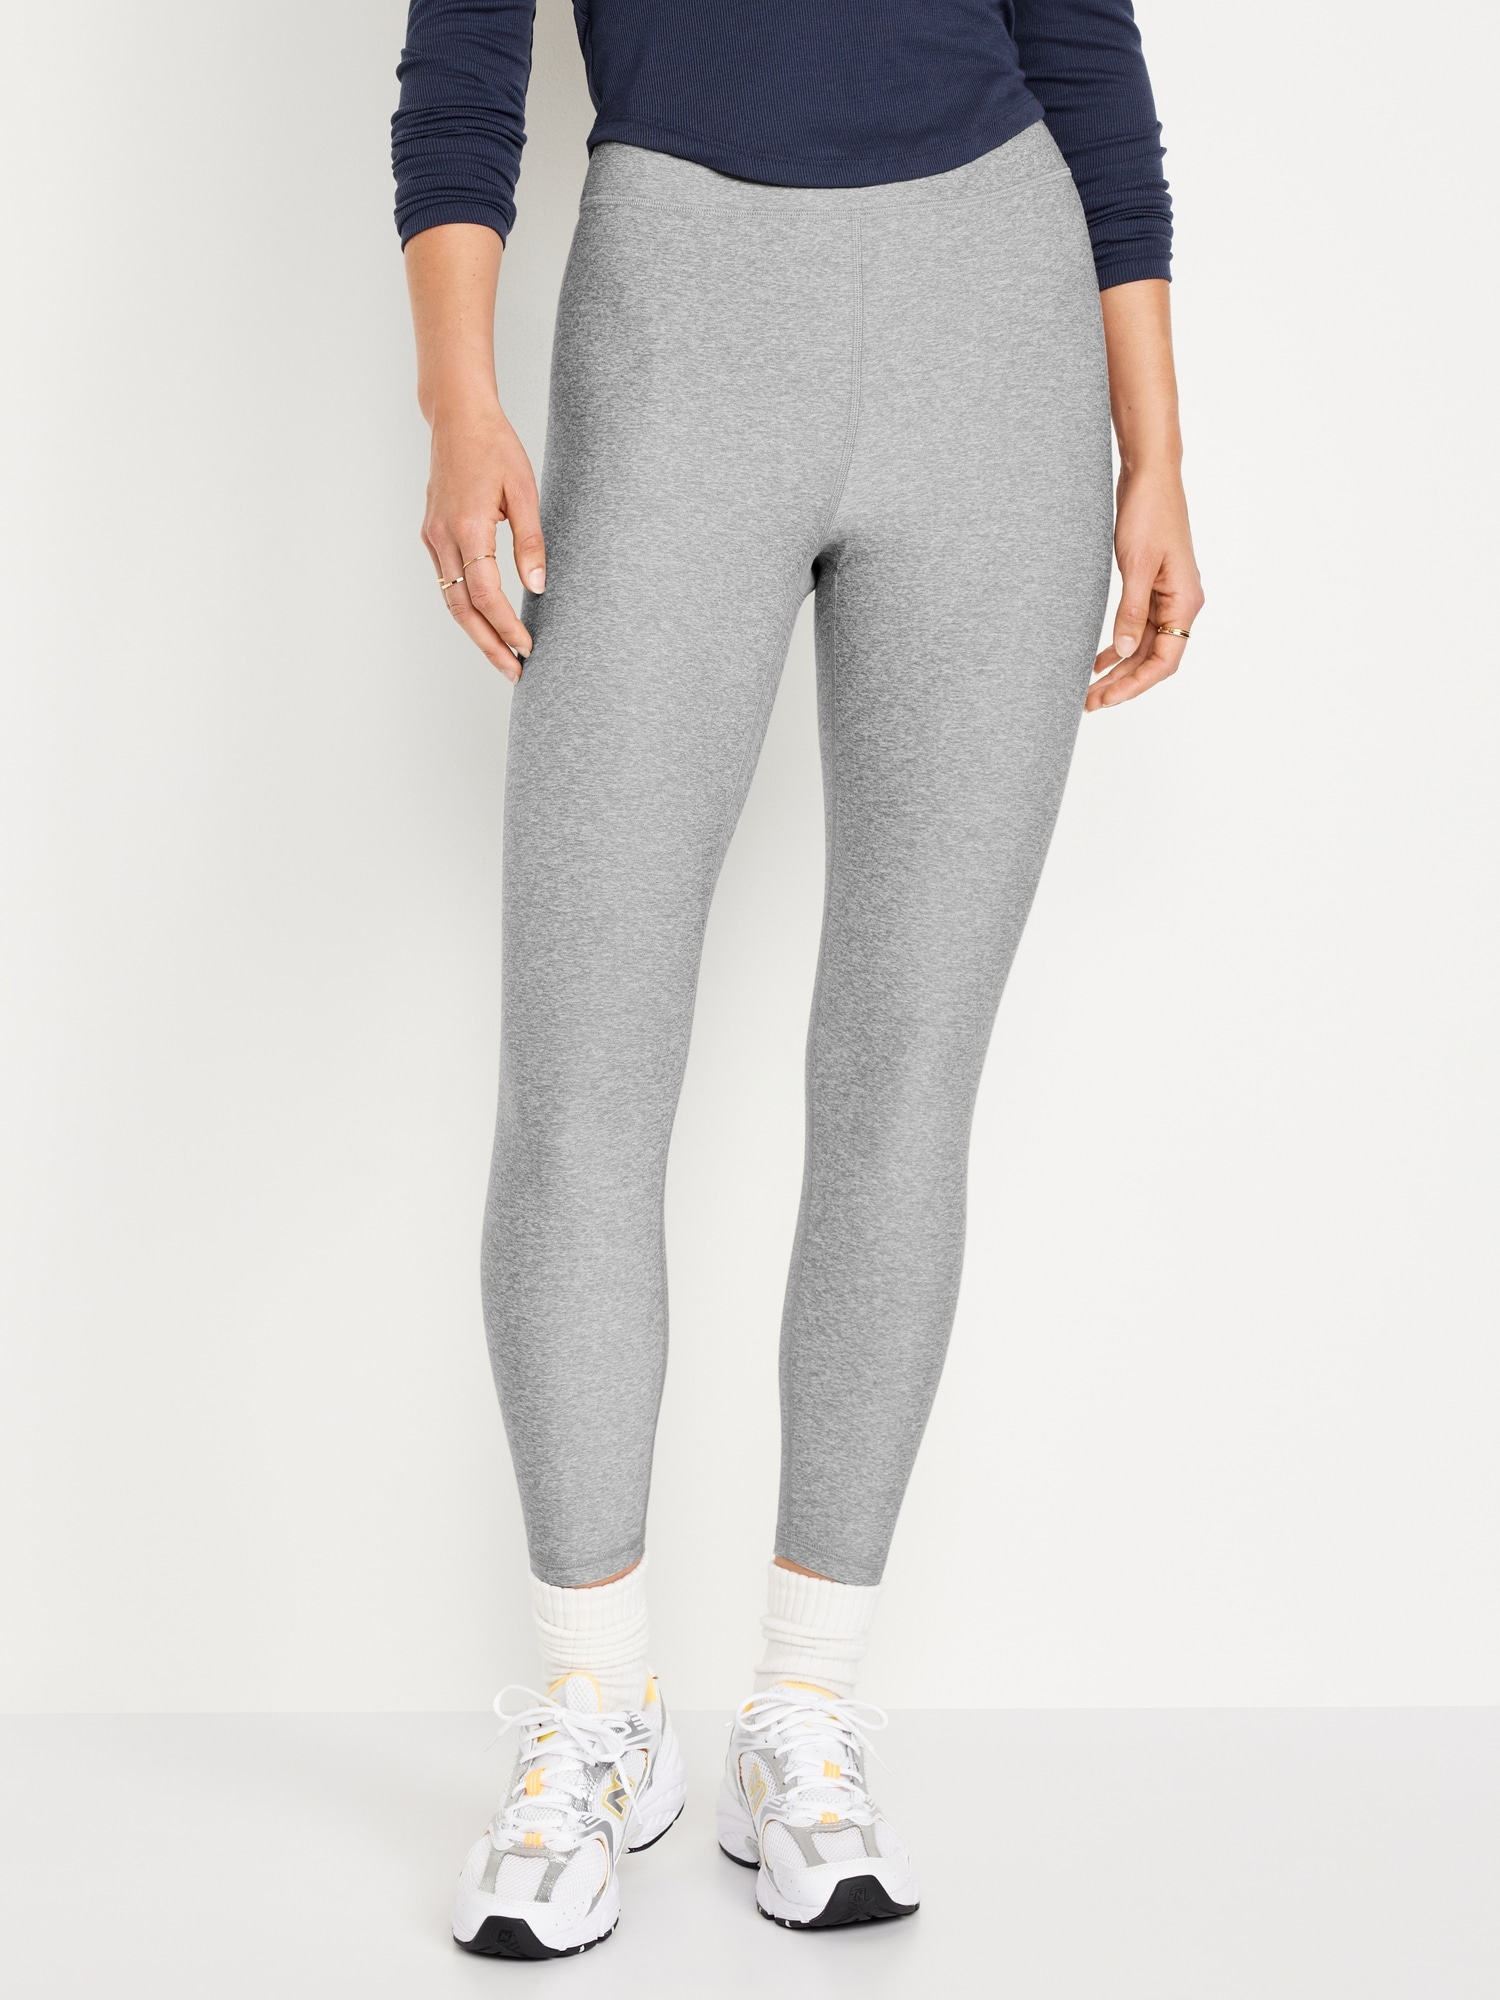 Old Navy Active Go Dry Black Leggings - $12 (60% Off Retail